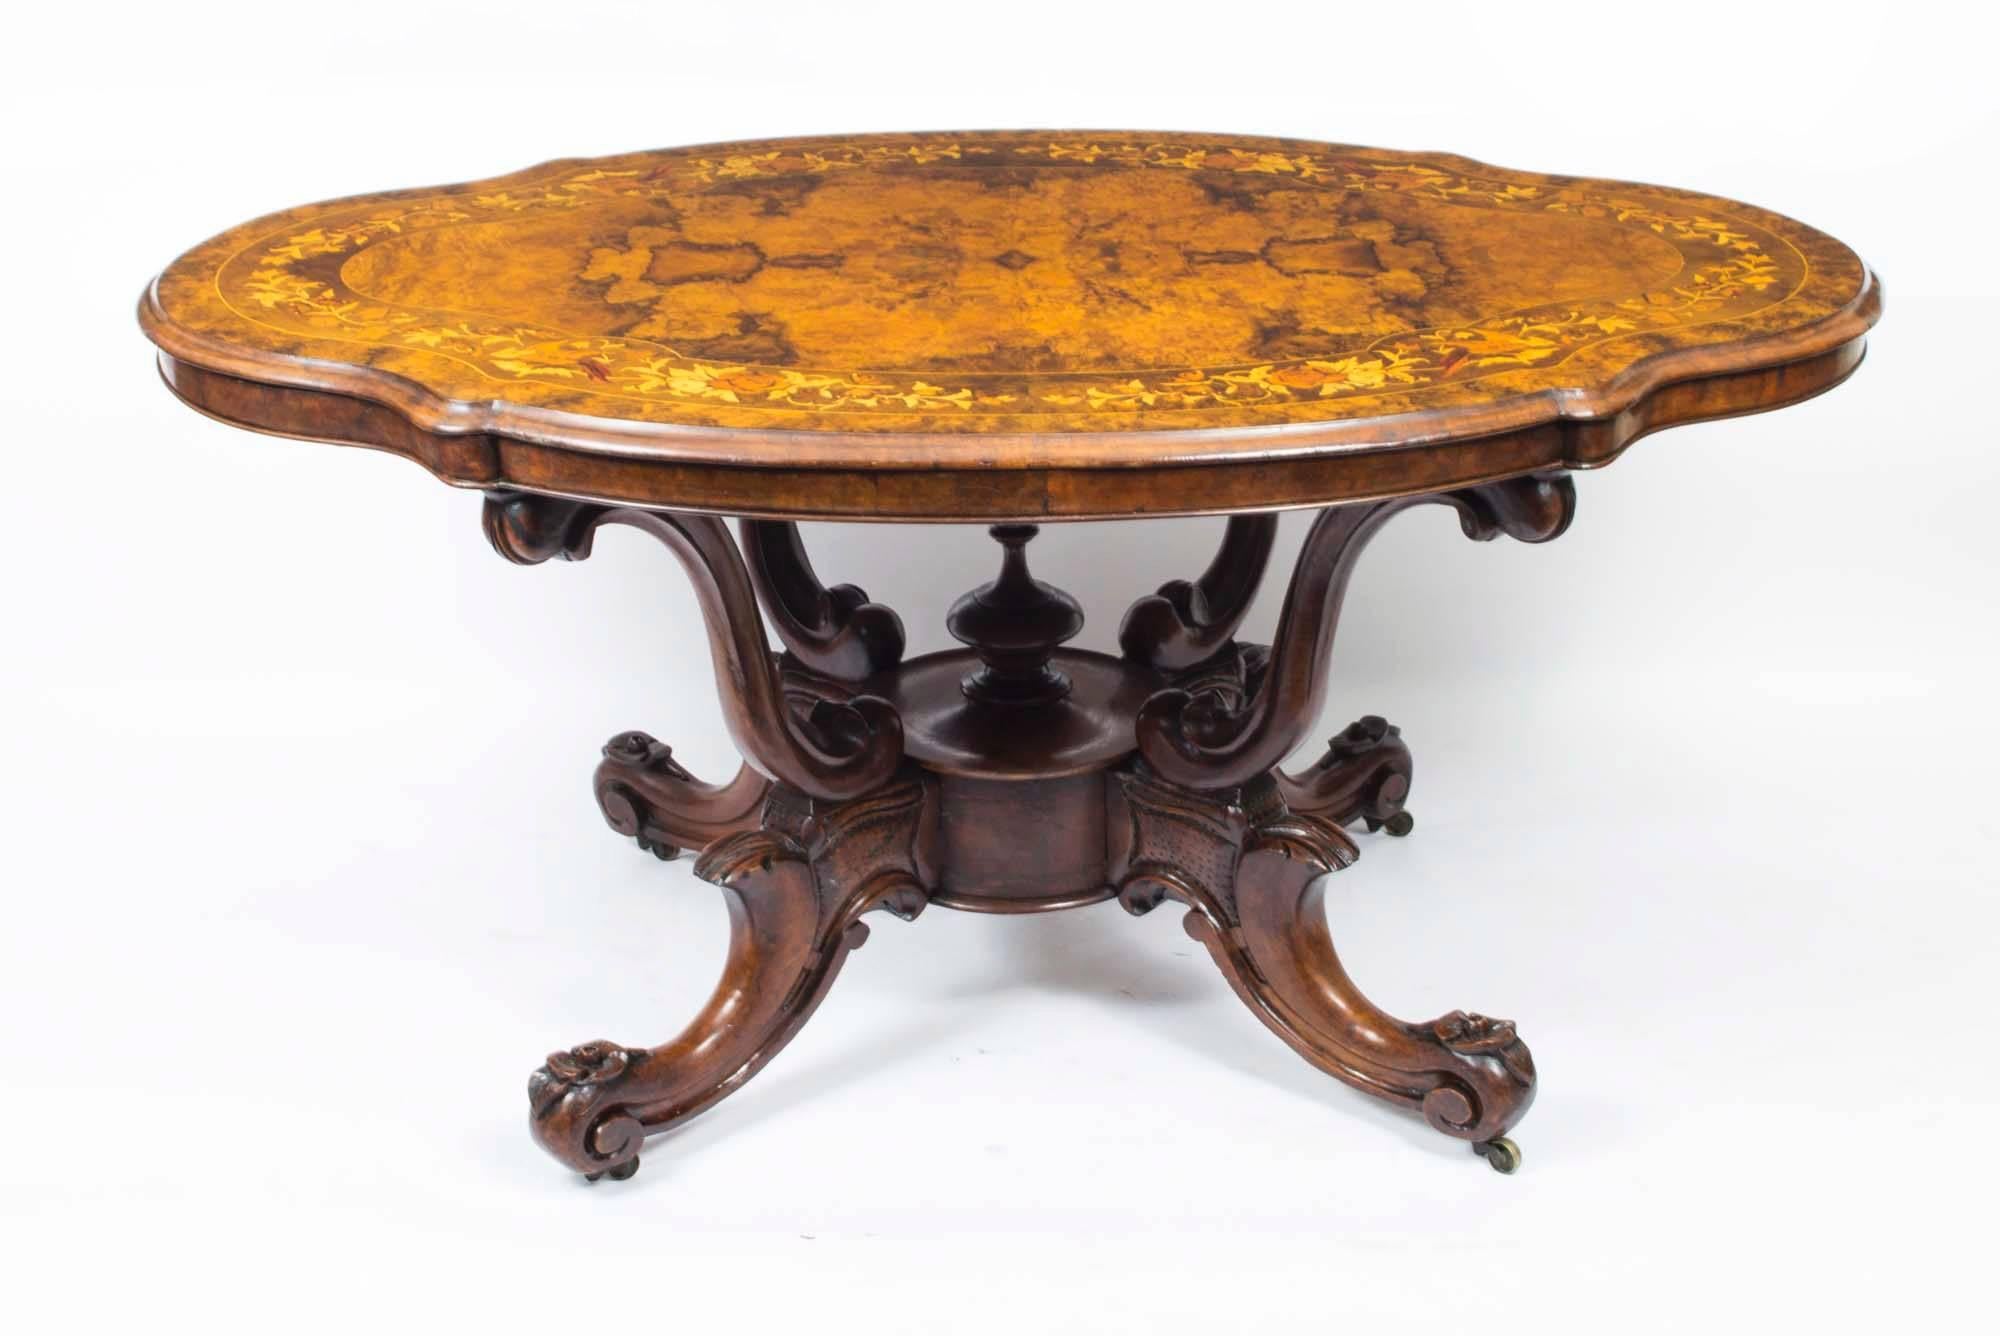 This is a superb Victorian burr walnut and floral marquetry centre table, with basket base, circa 1870 in date. 

The table top is a serepentine oval shape and features wonderful burr walnut with superb floral marquetry inlaid decoration. The